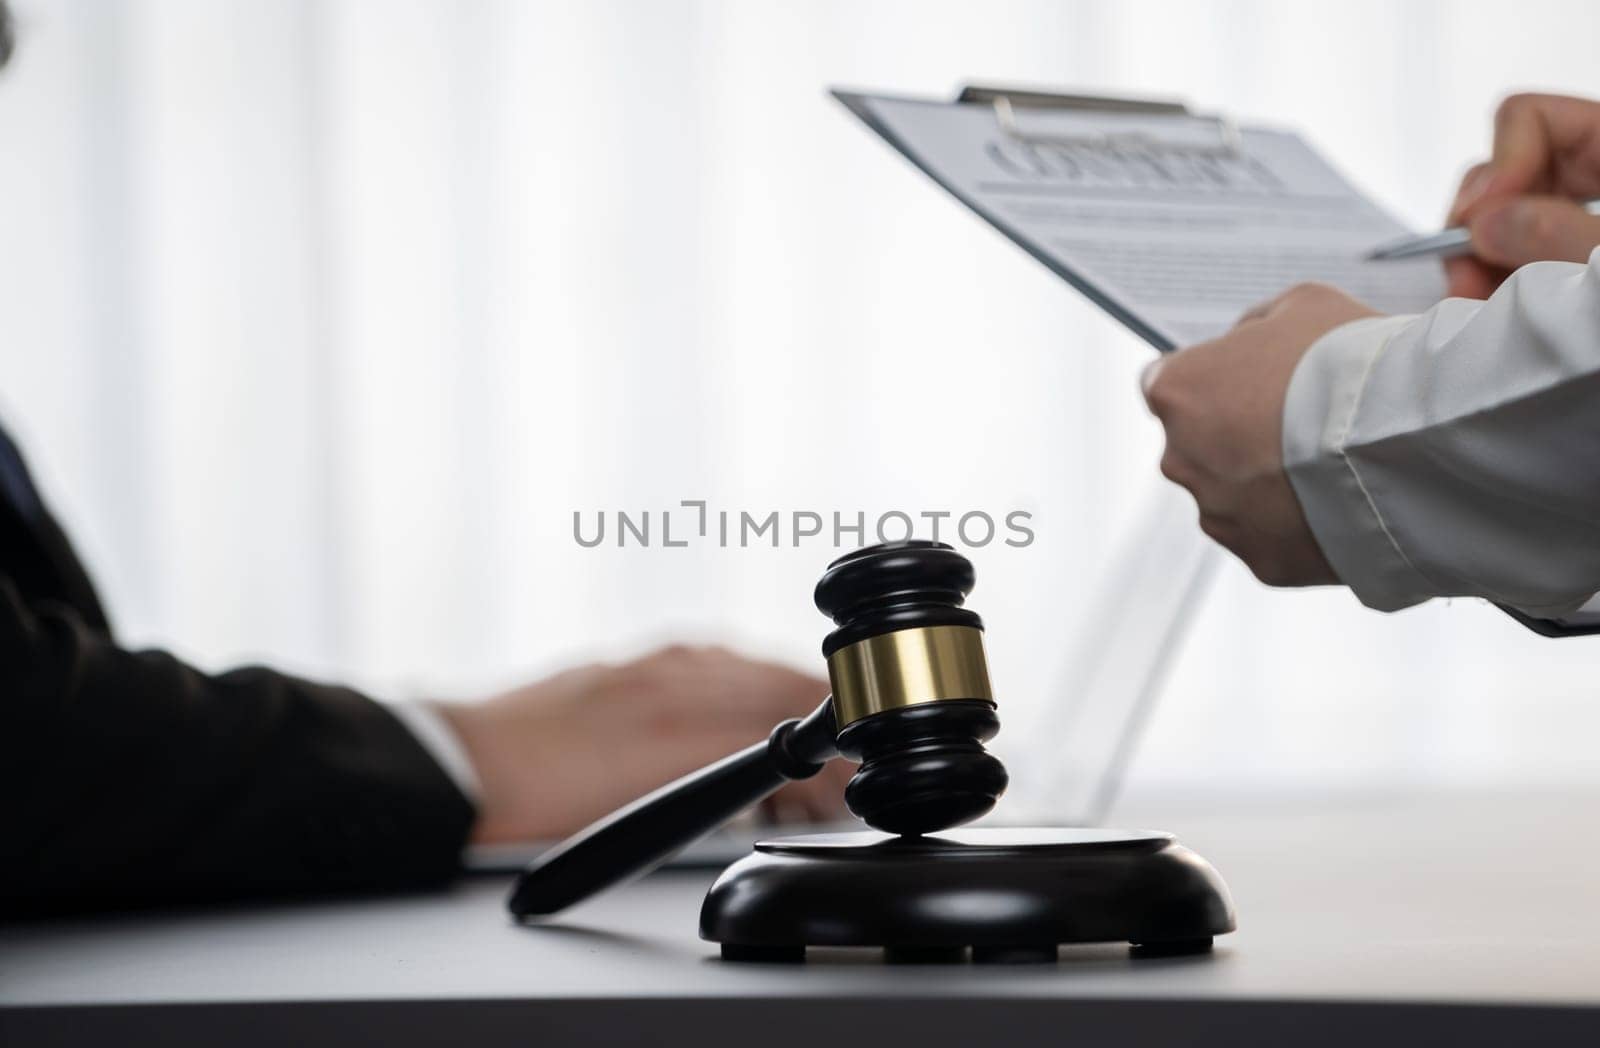 Focus gavel hammer for righteous and equality judgment with blur background of lawyer colleagues or legal team working with laptop, drafting legal documents for litigation at law firm. Equilibrium